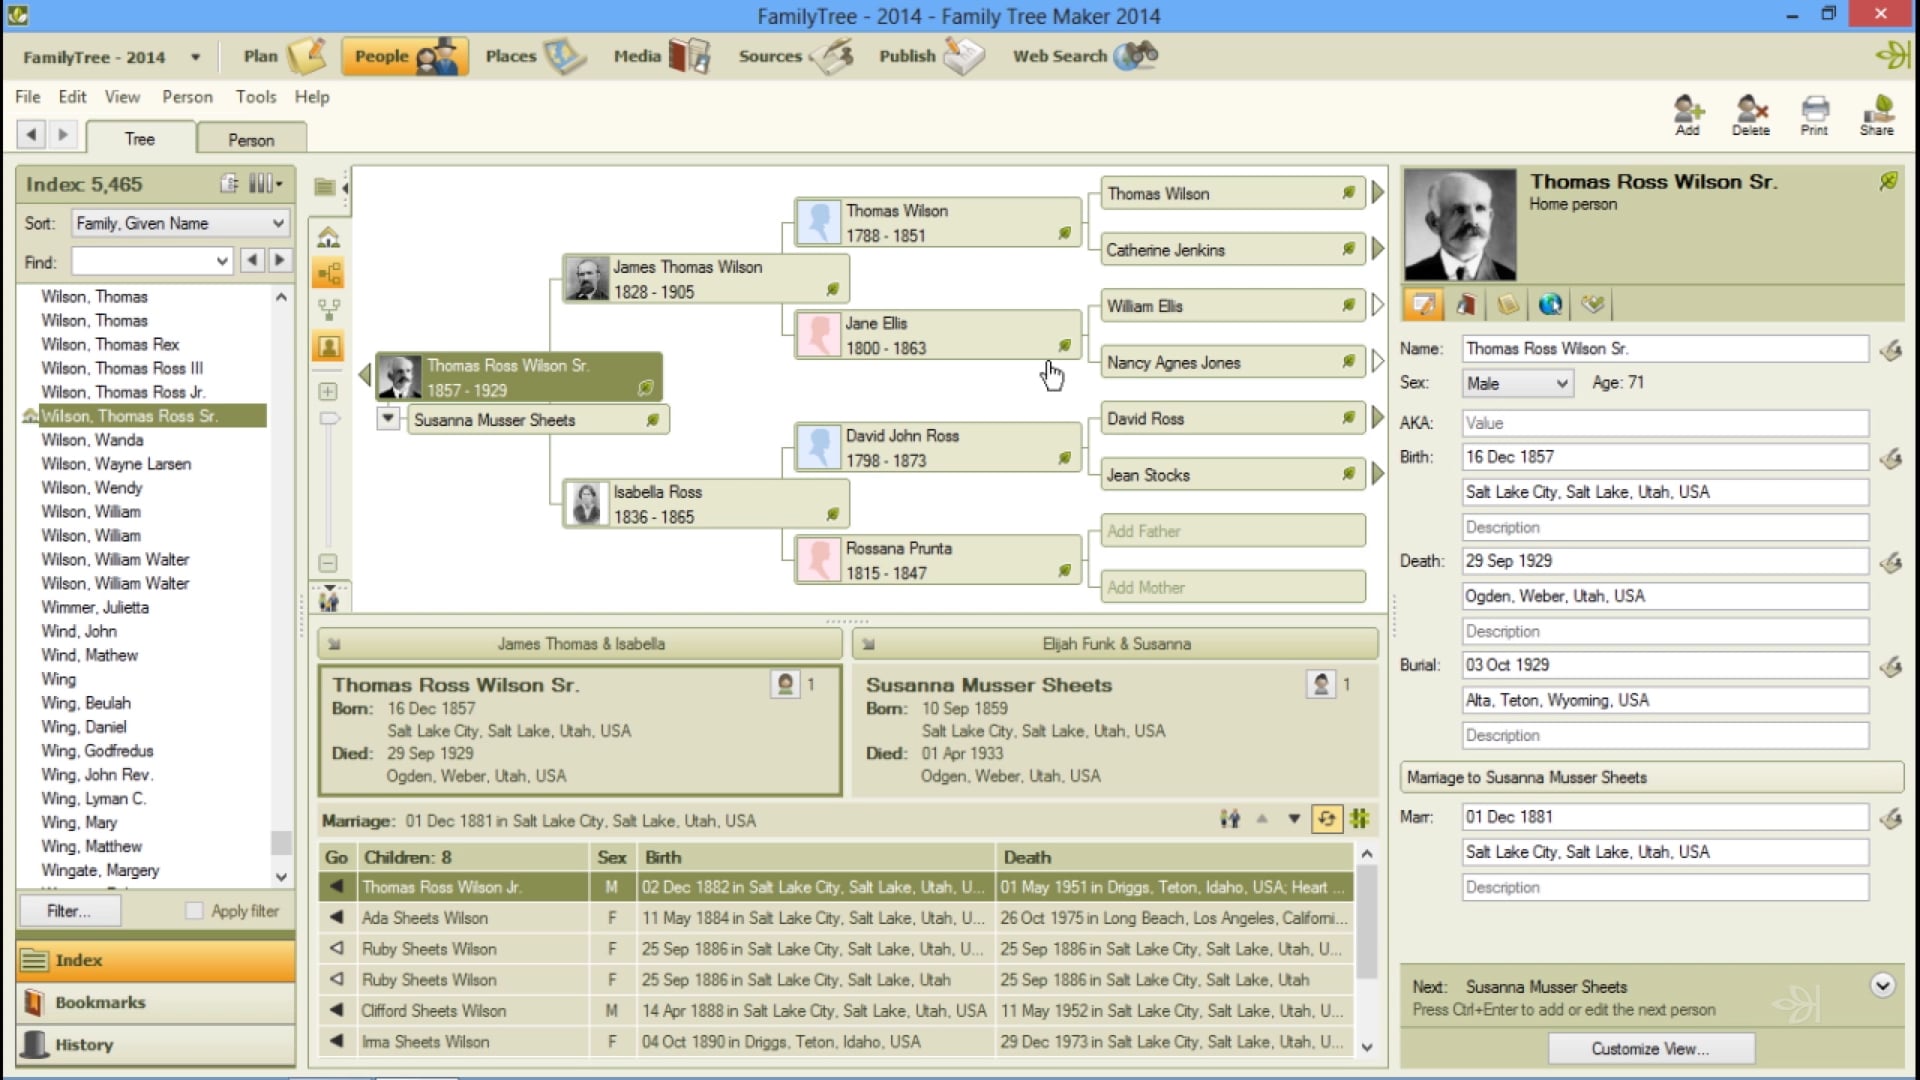 where to buy family tree maker 2014 software